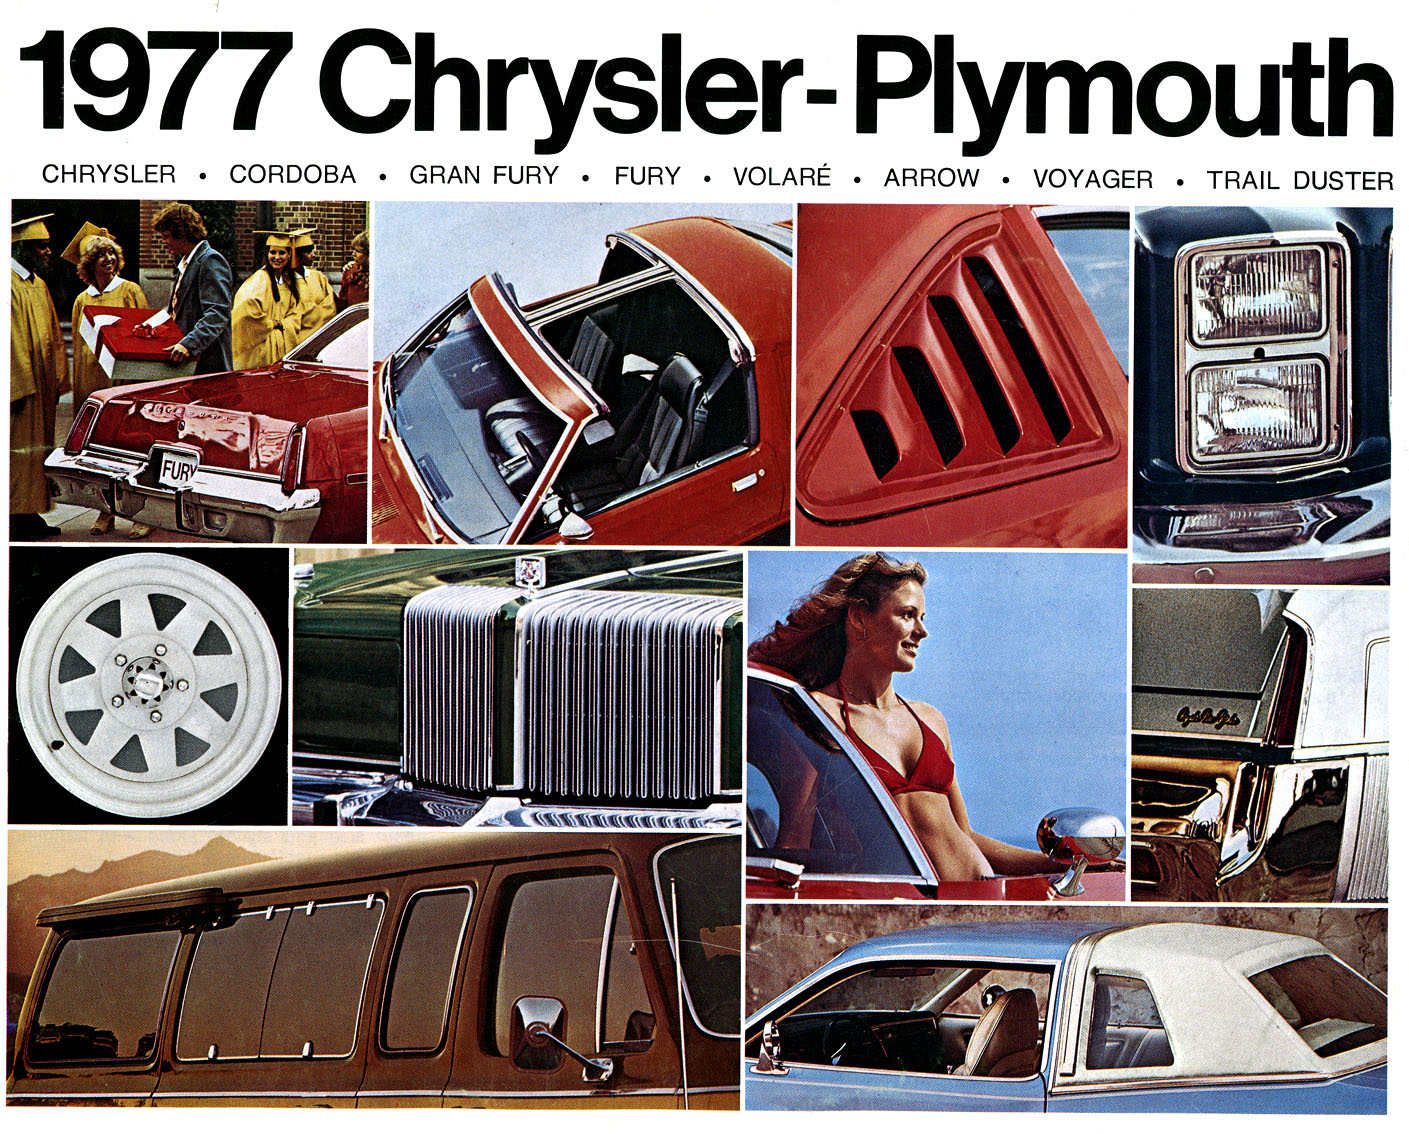 1977 Chrysler Plymouth Brochure Page 5